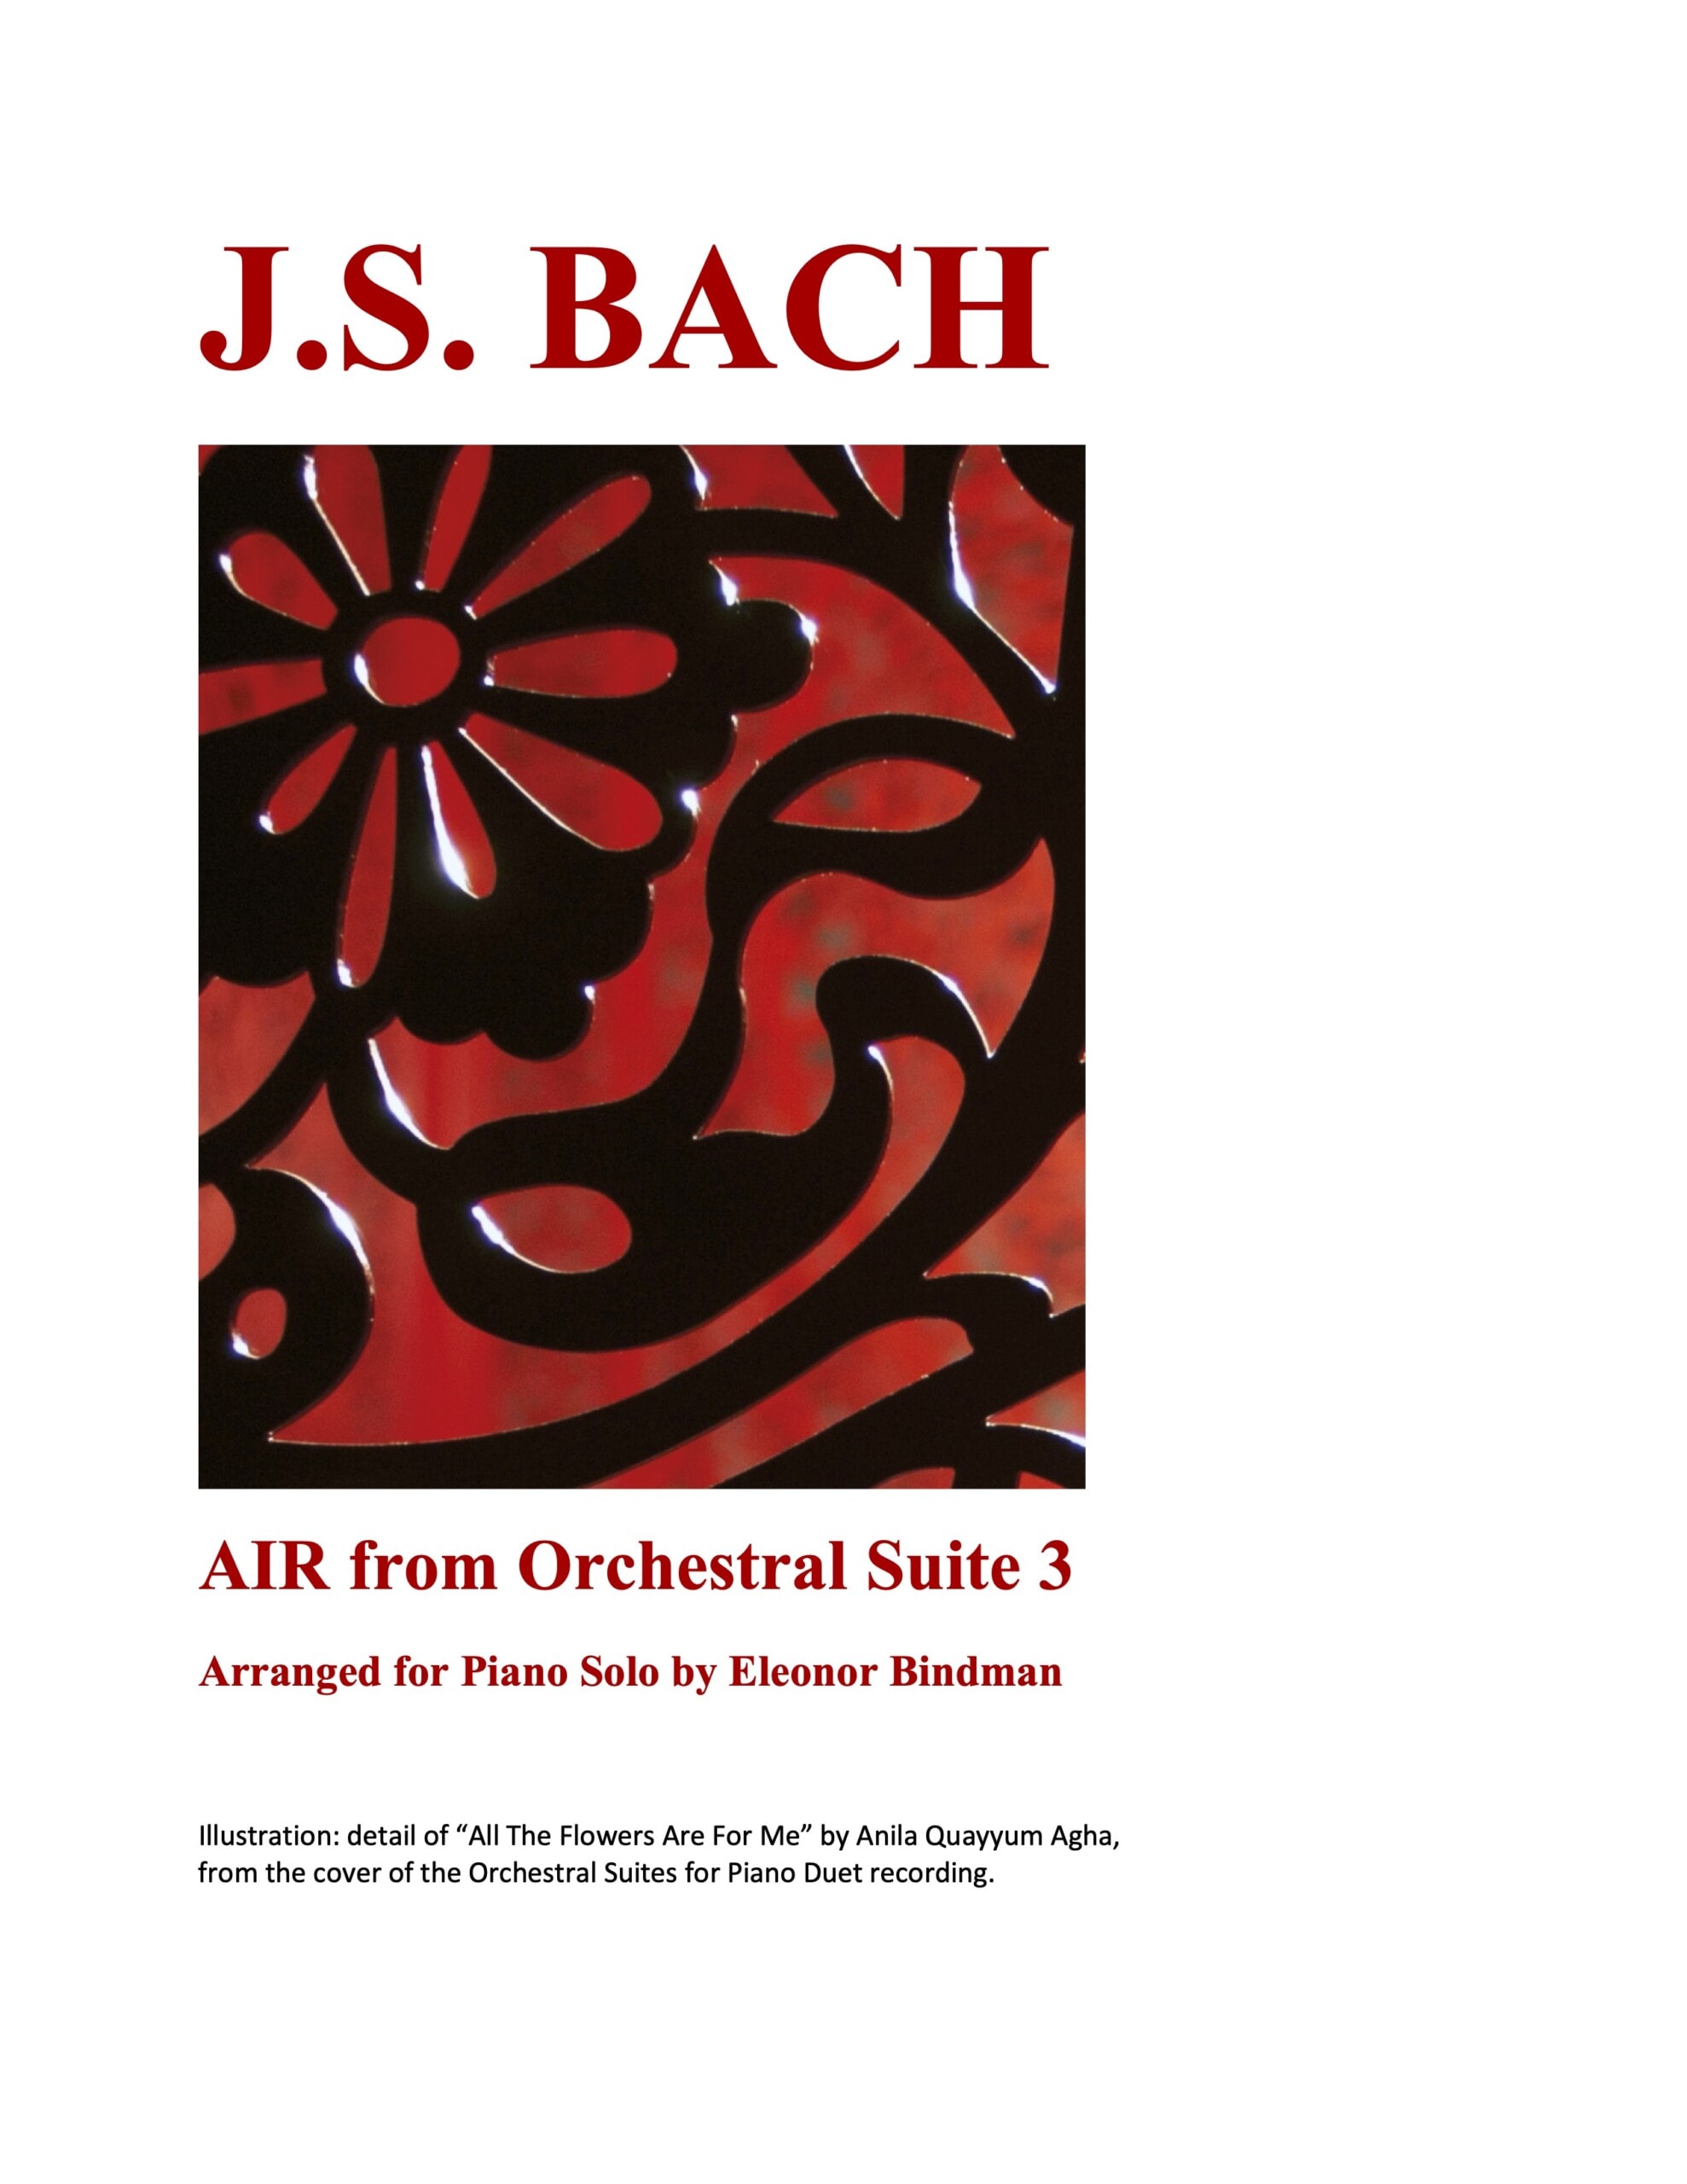 rigidity affix Lunar New Year J.S. Bach: Air from Orchestral Suite 3 | Eleonor Bindman